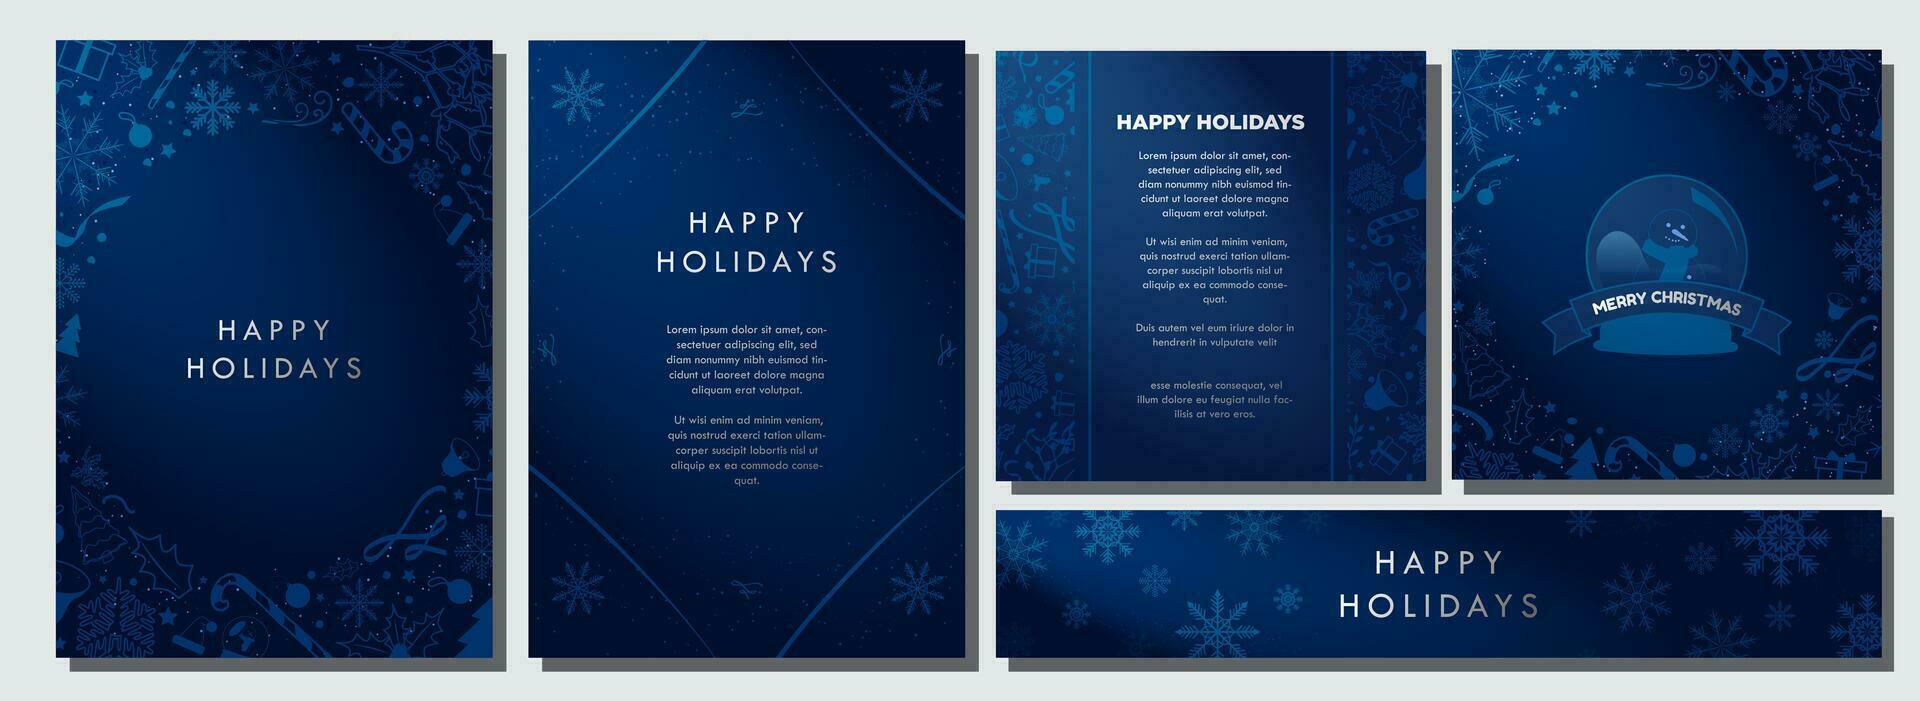 Stylish Christmas theme Backgrounds in gradient midnight blue and white, decorated with Blue Christmas elements. Beautiful minimalist Winter templates. Card, banners, a4 posters. Vector Illustration.